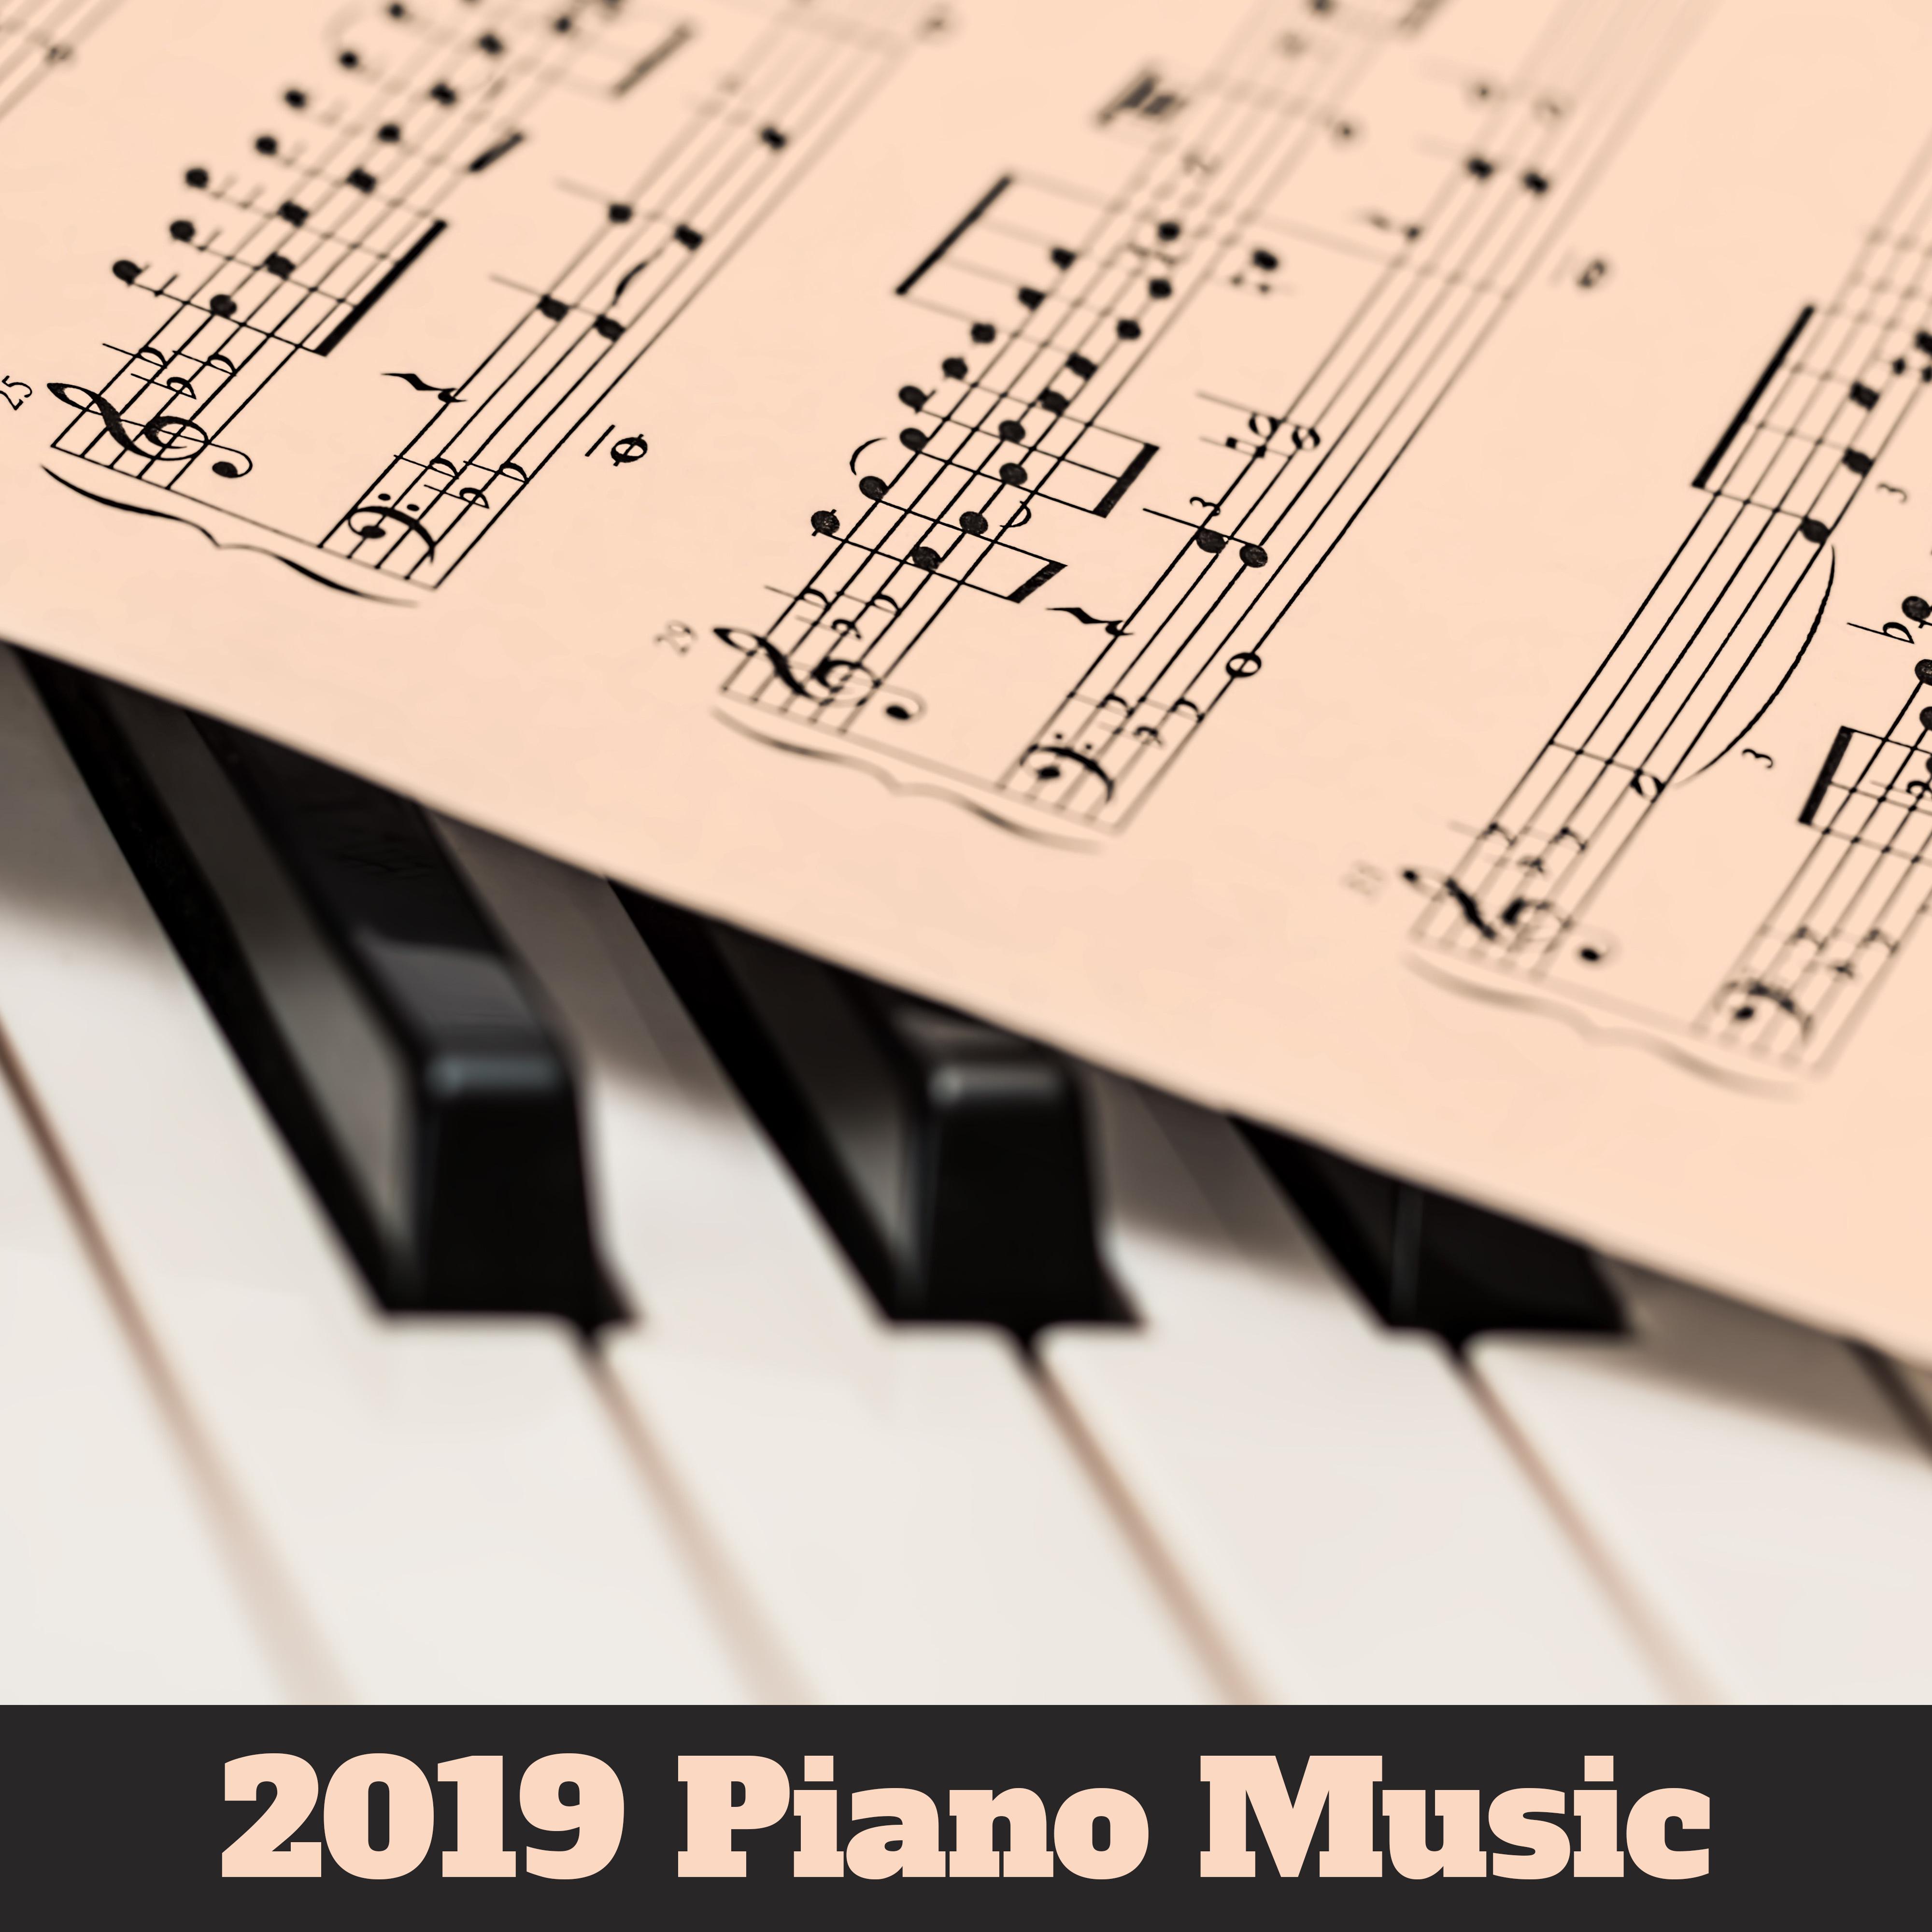 2019 Piano Music: Relaxing Jazz at Night, Calming Vibes, Instrumental Jazz Music Ambient